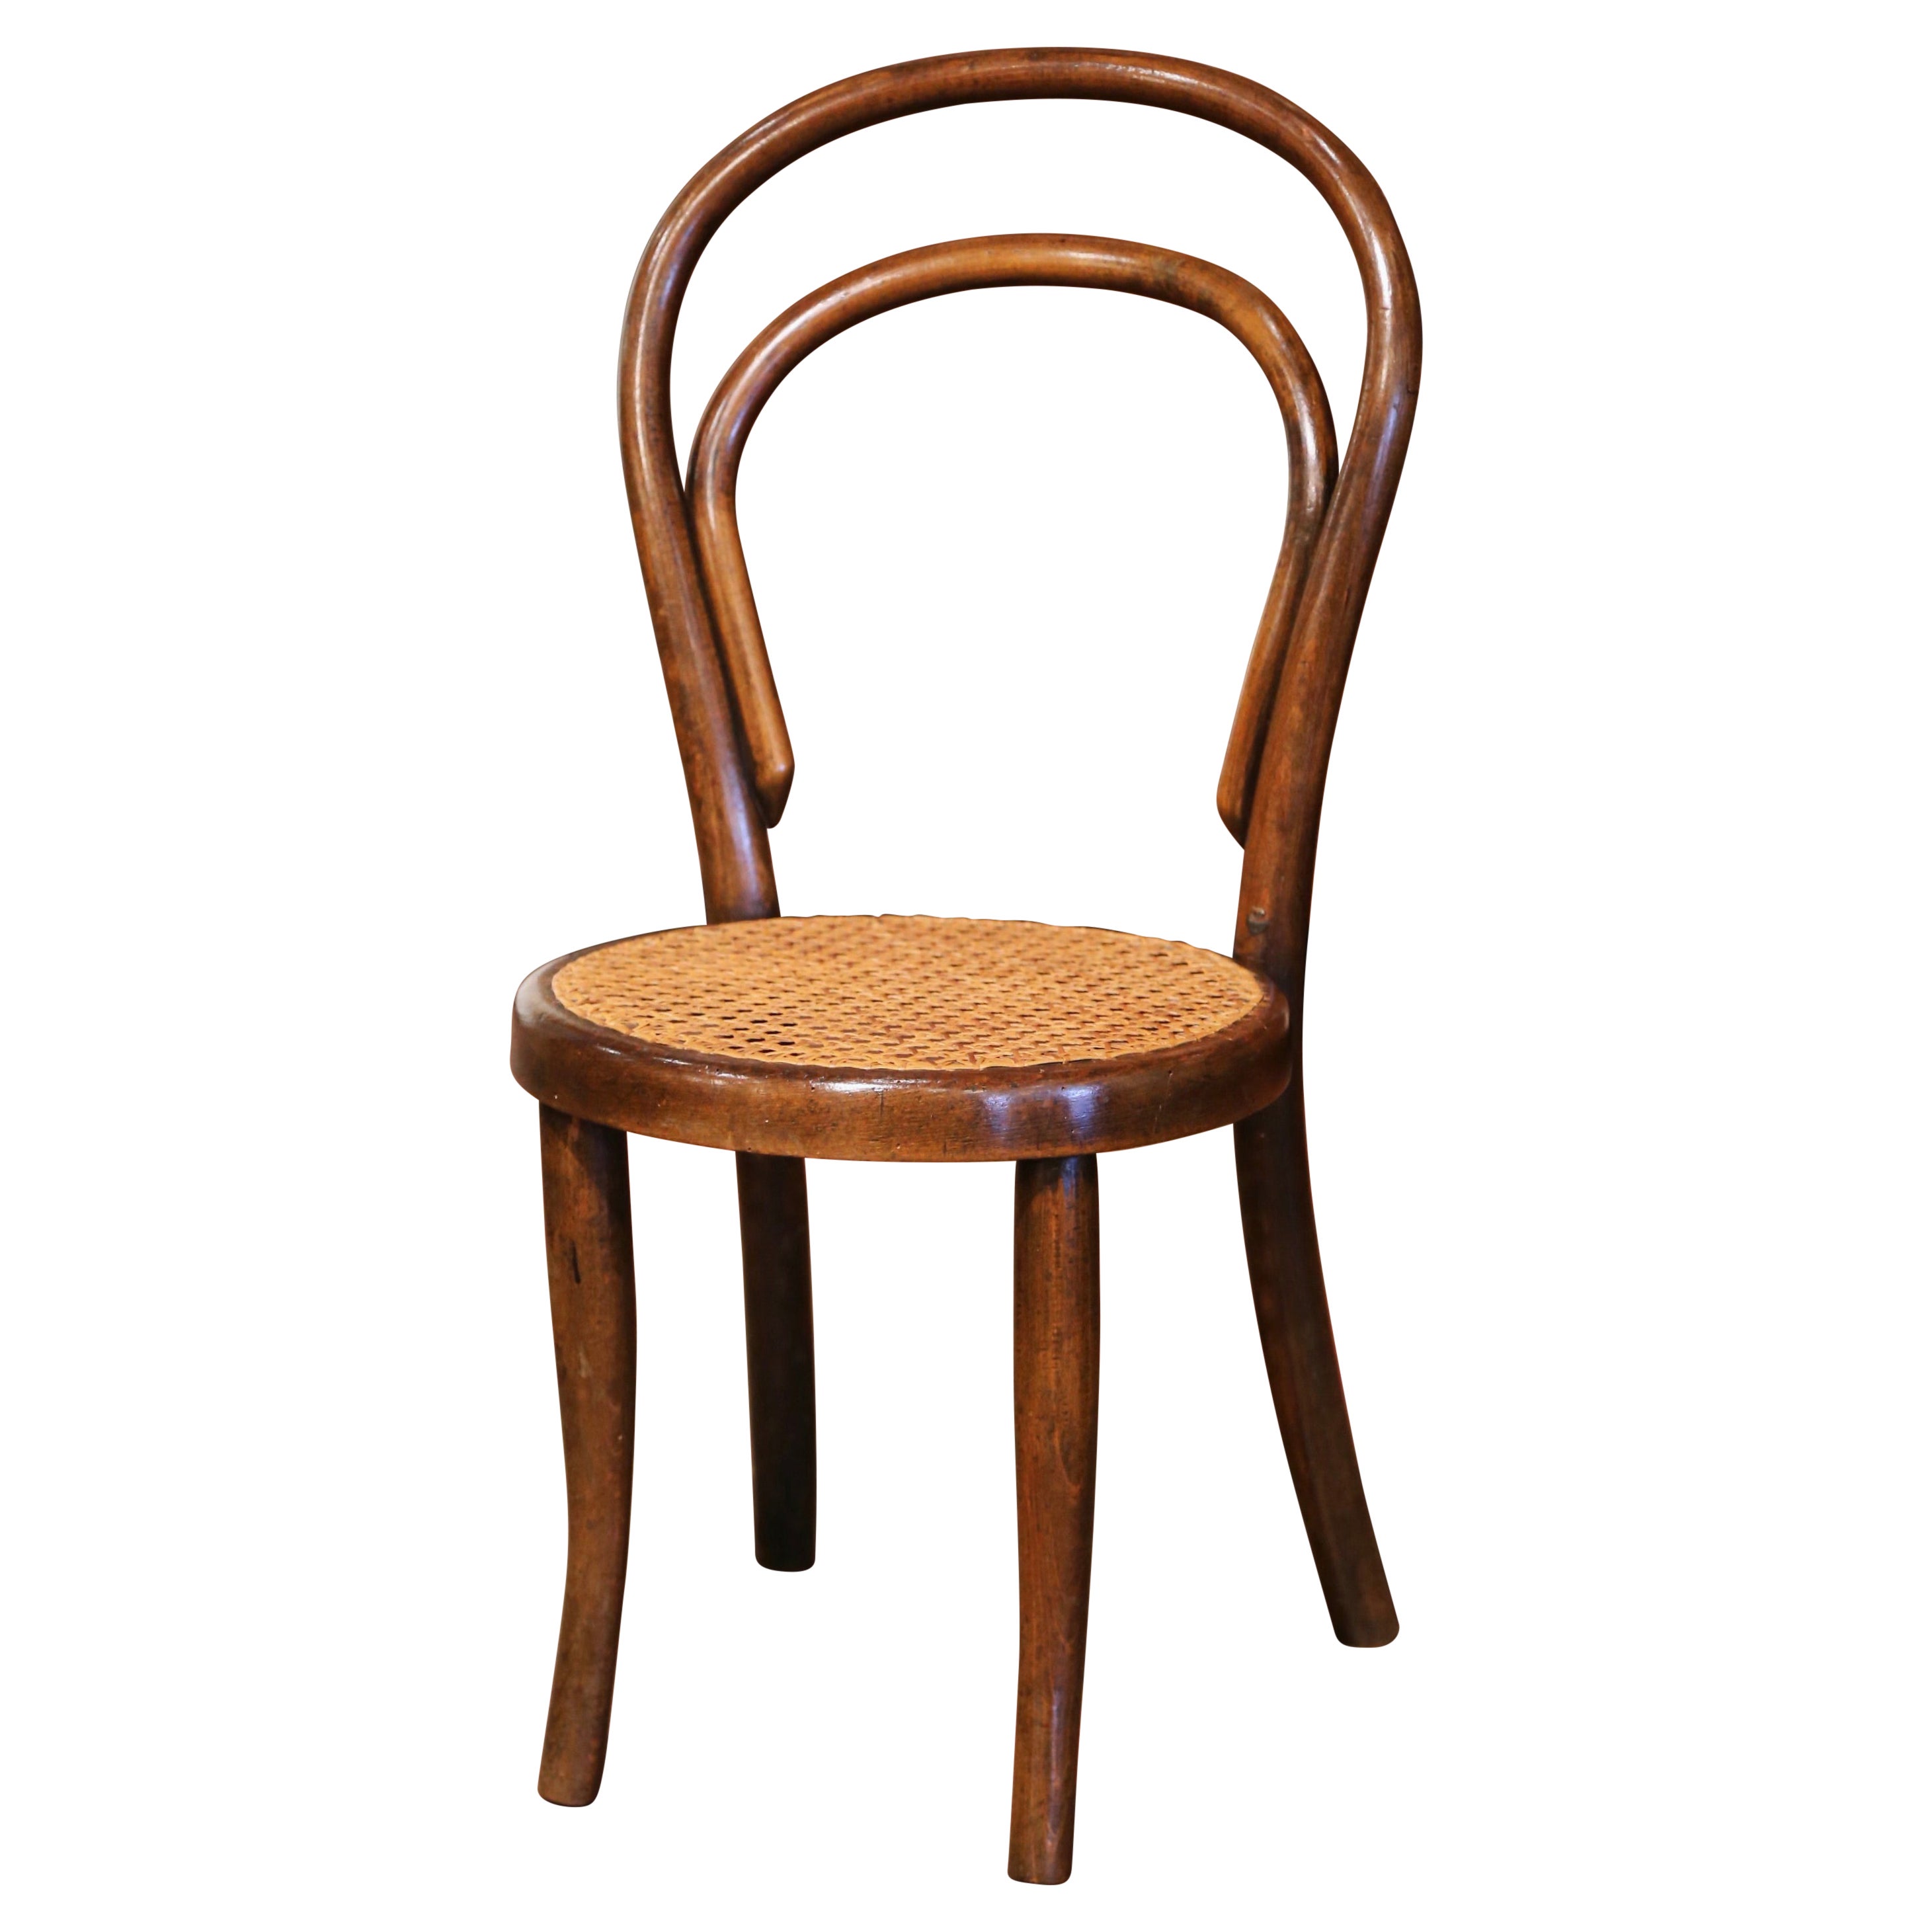 Early 20th Century French Bentwood and Cane Baby Chair Thonet Style For Sale